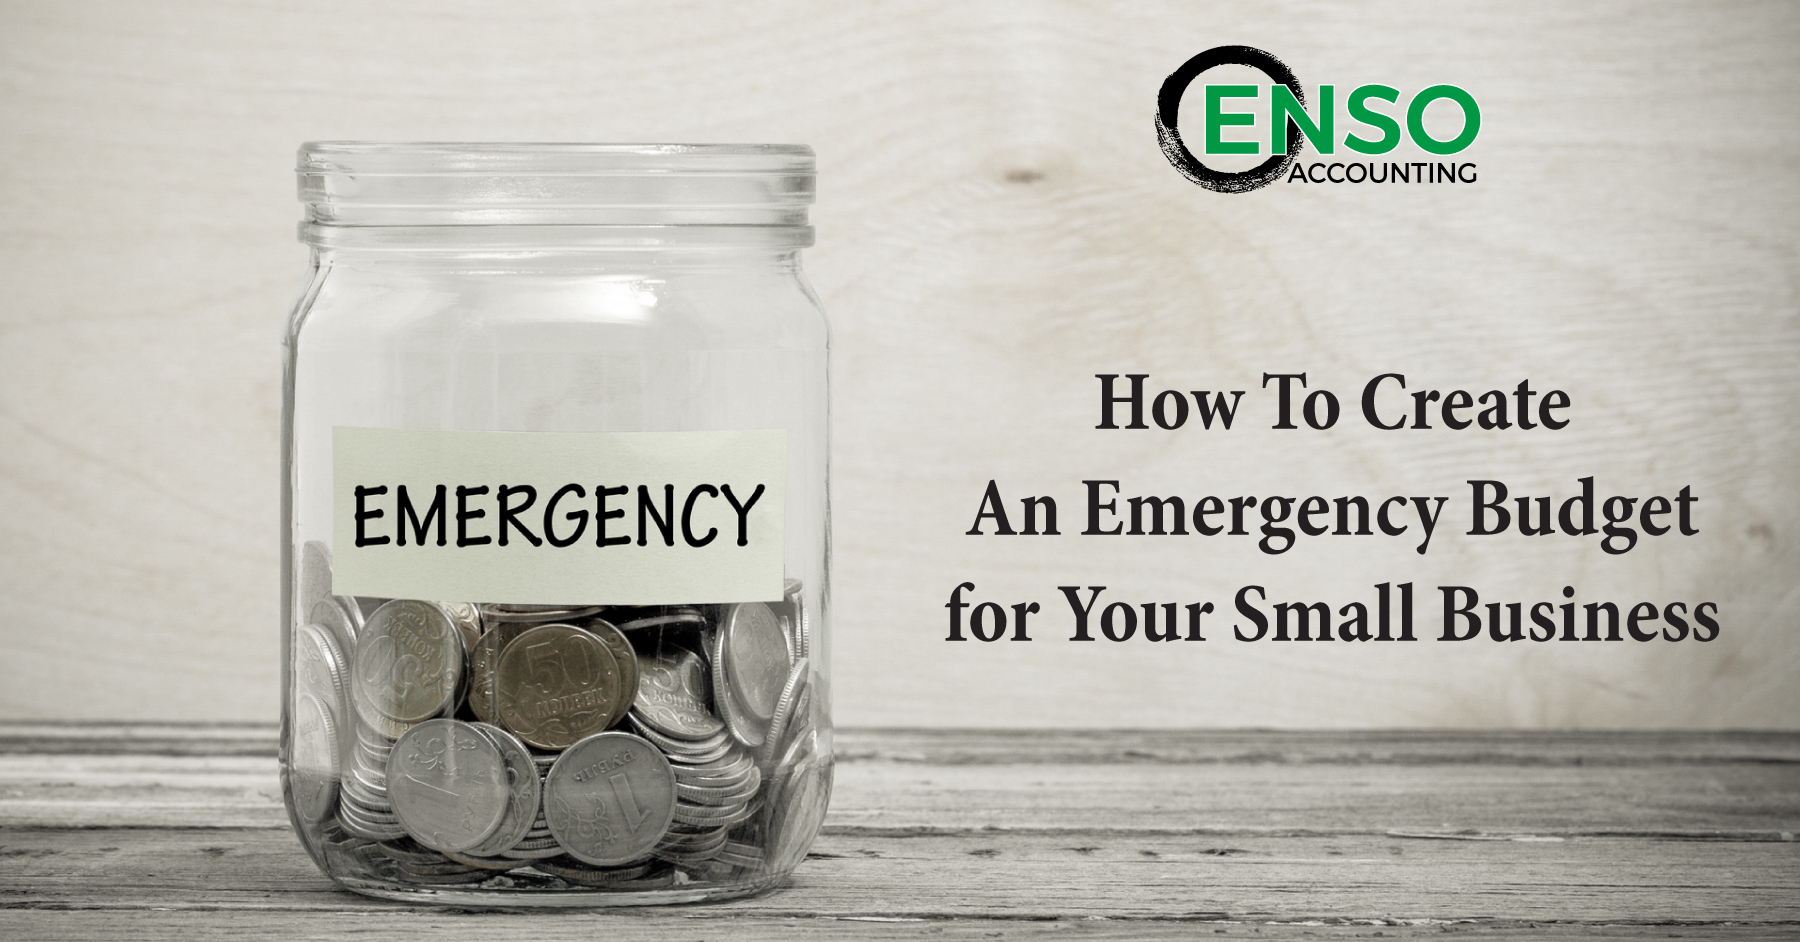 How To Create An Emergency Budget for Your Small Business